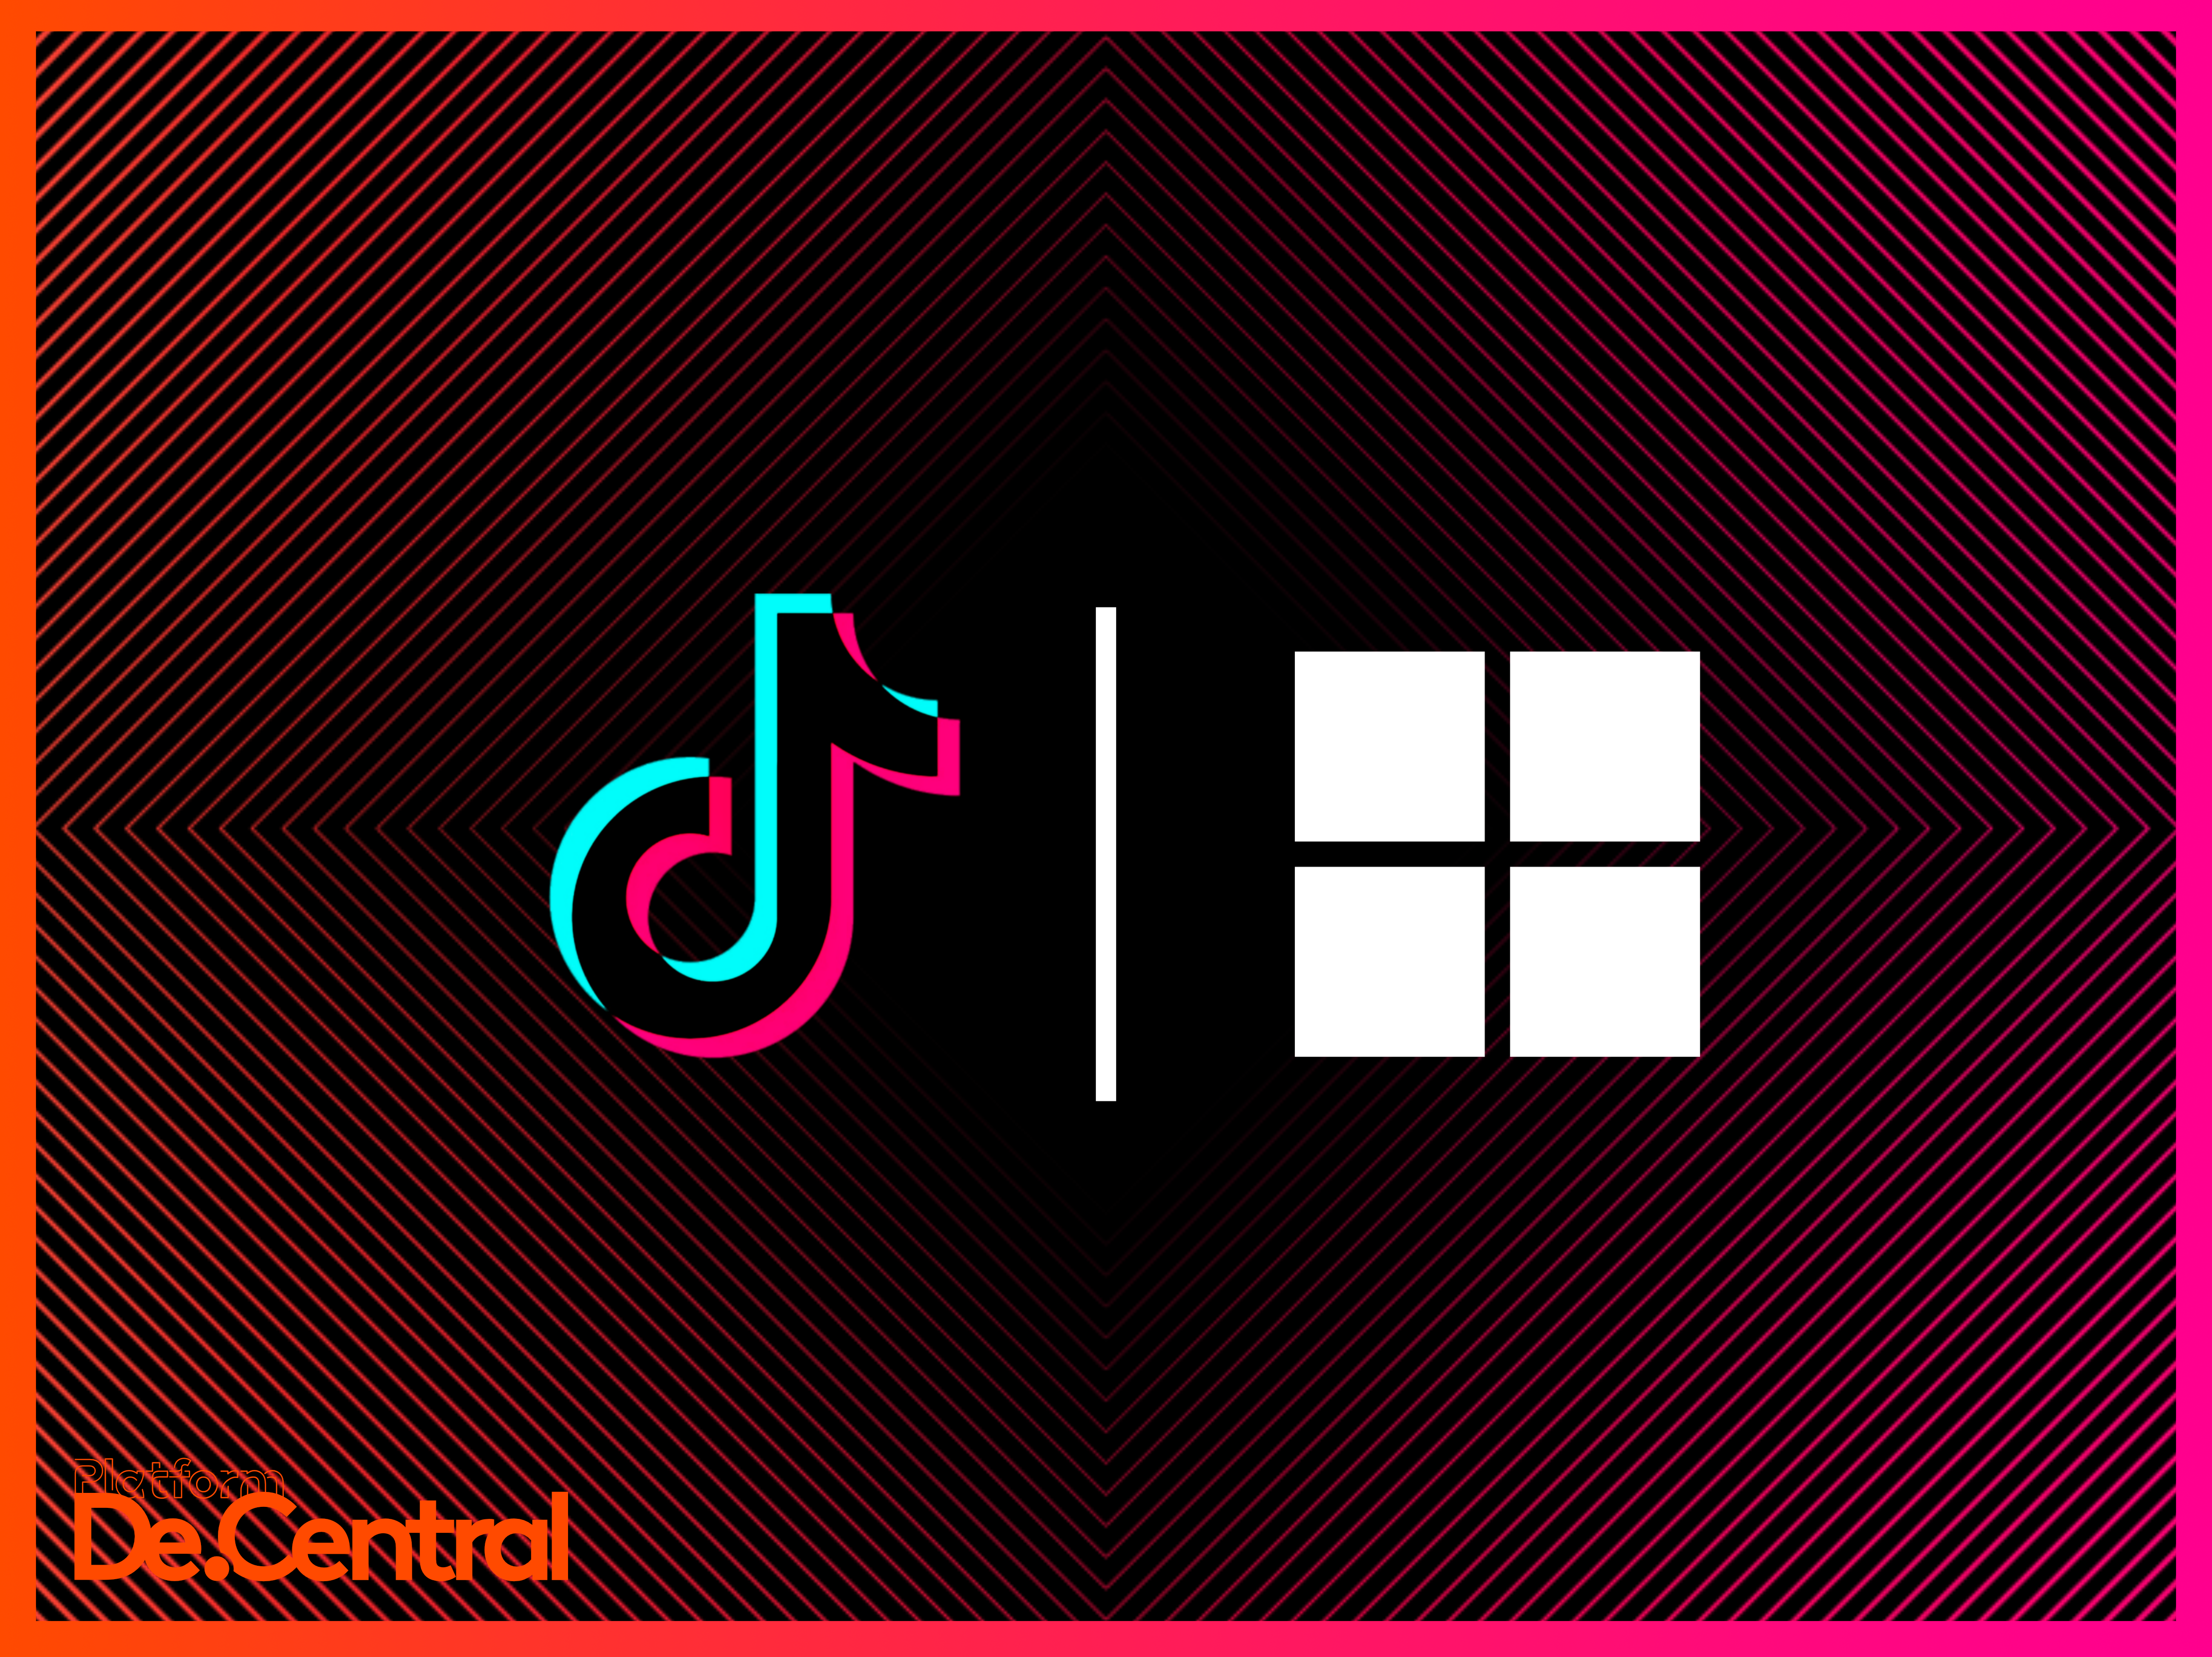 Microsoft may acquire US part of TikTok from Bytedance